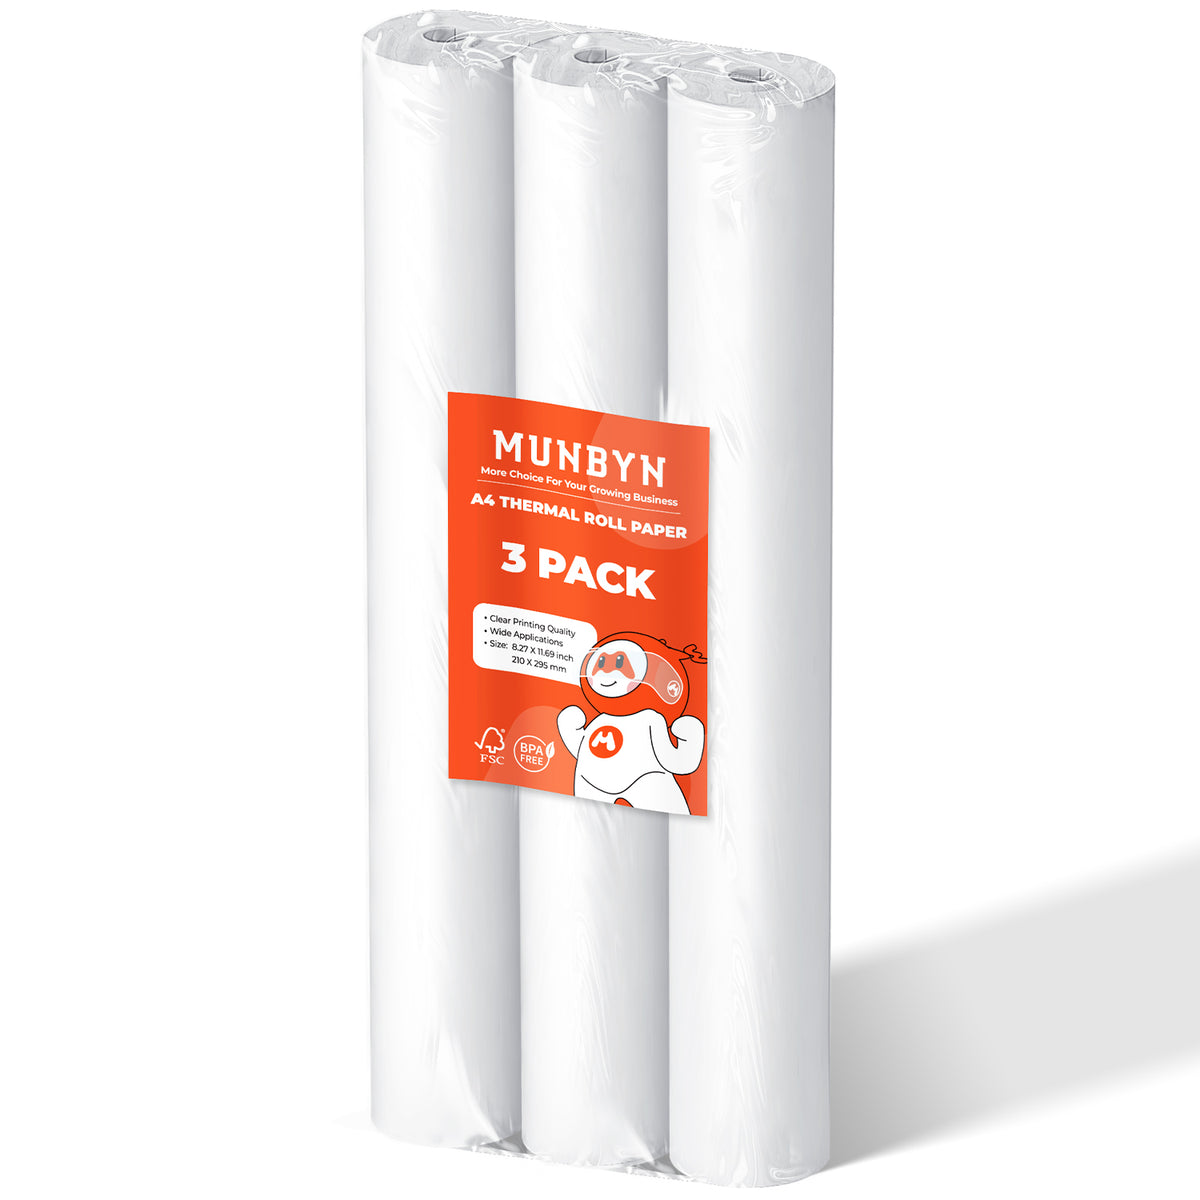 MUNBYN A4 thermal paper rolls are the perfect choice for businesses seeking clarity and sustainability in their printing solutions.